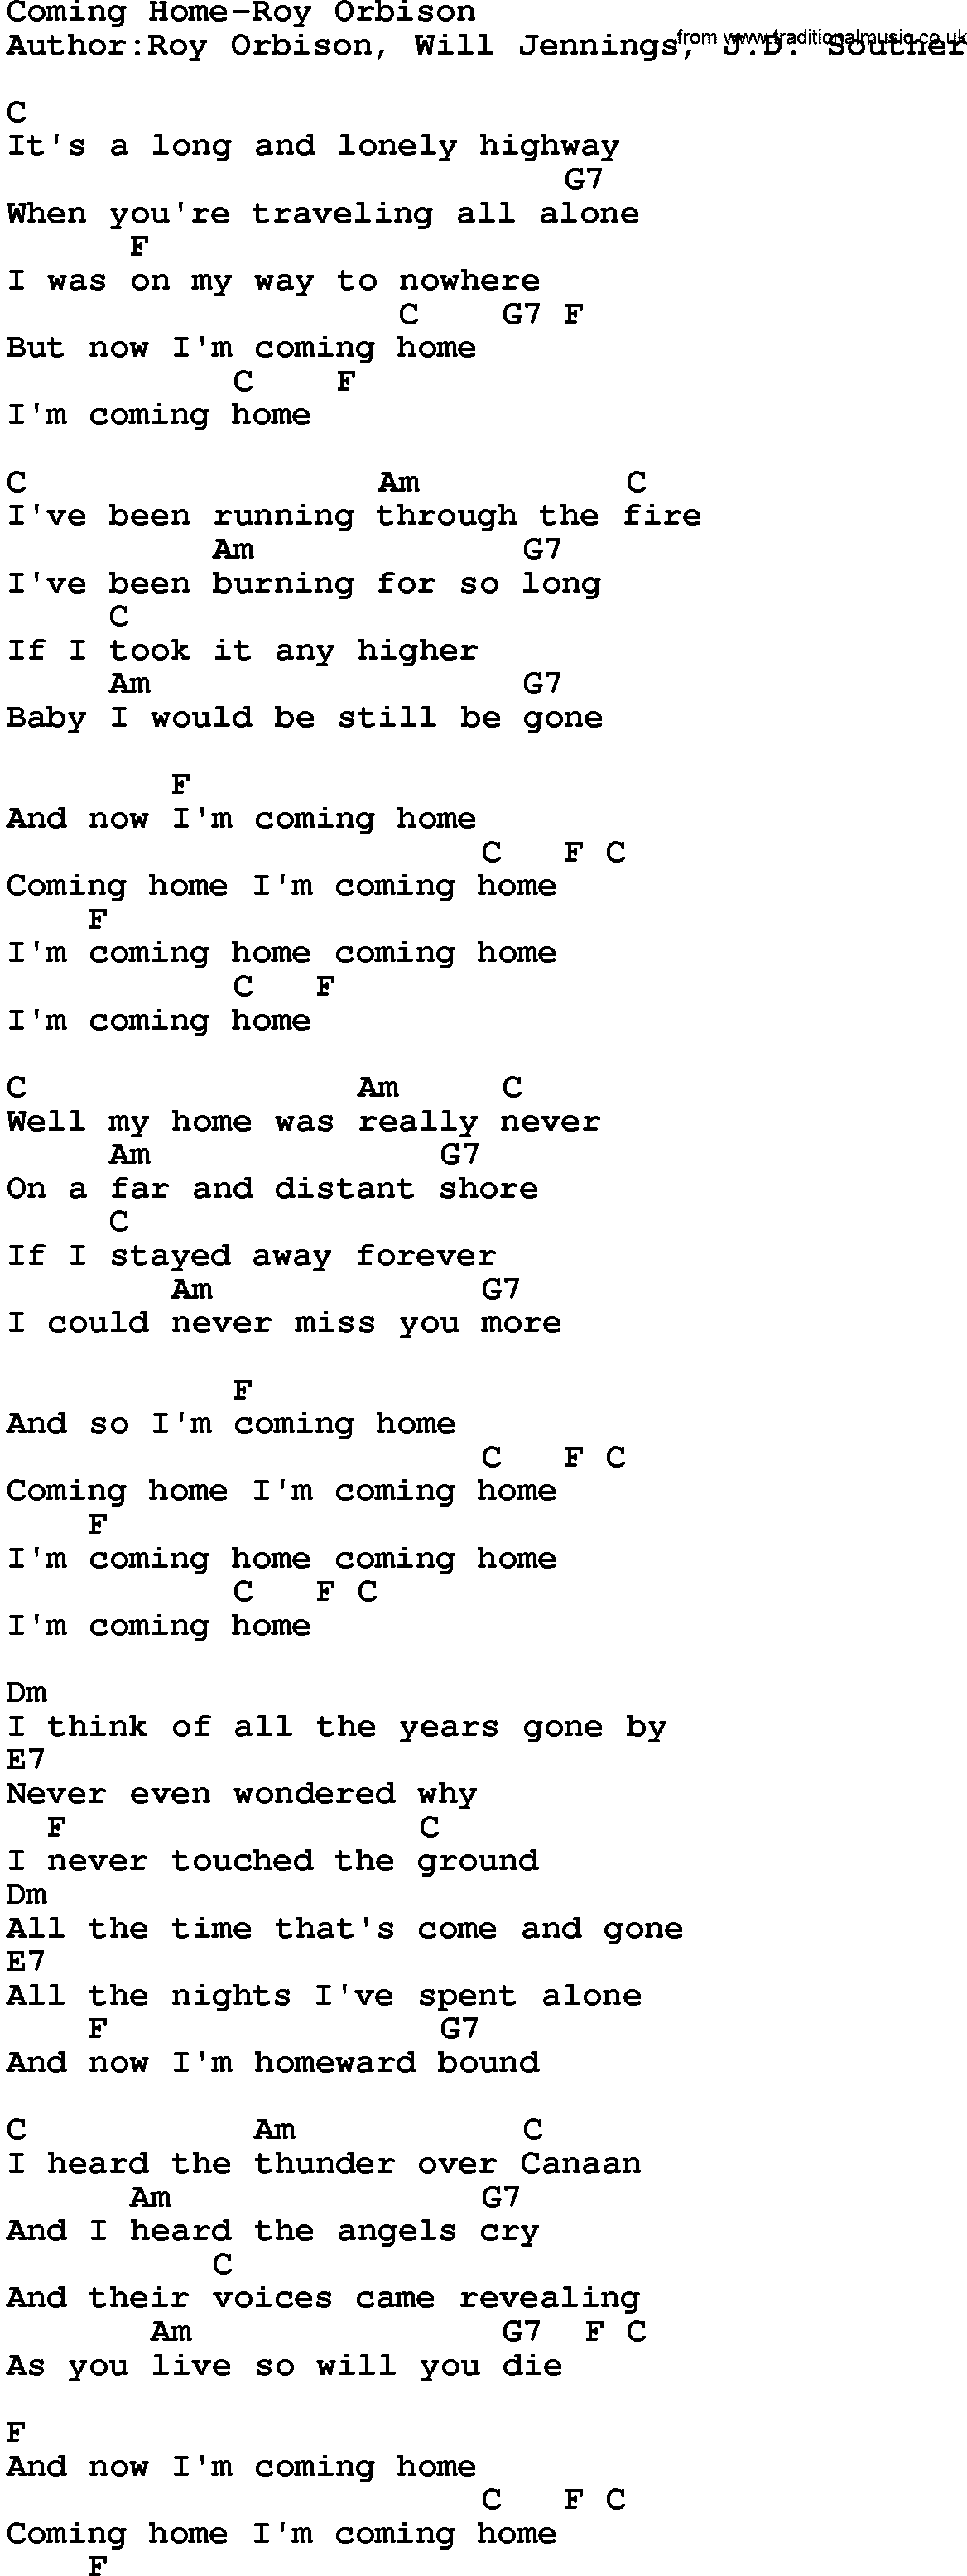 Country music song: Coming Home-Roy Orbison lyrics and chords